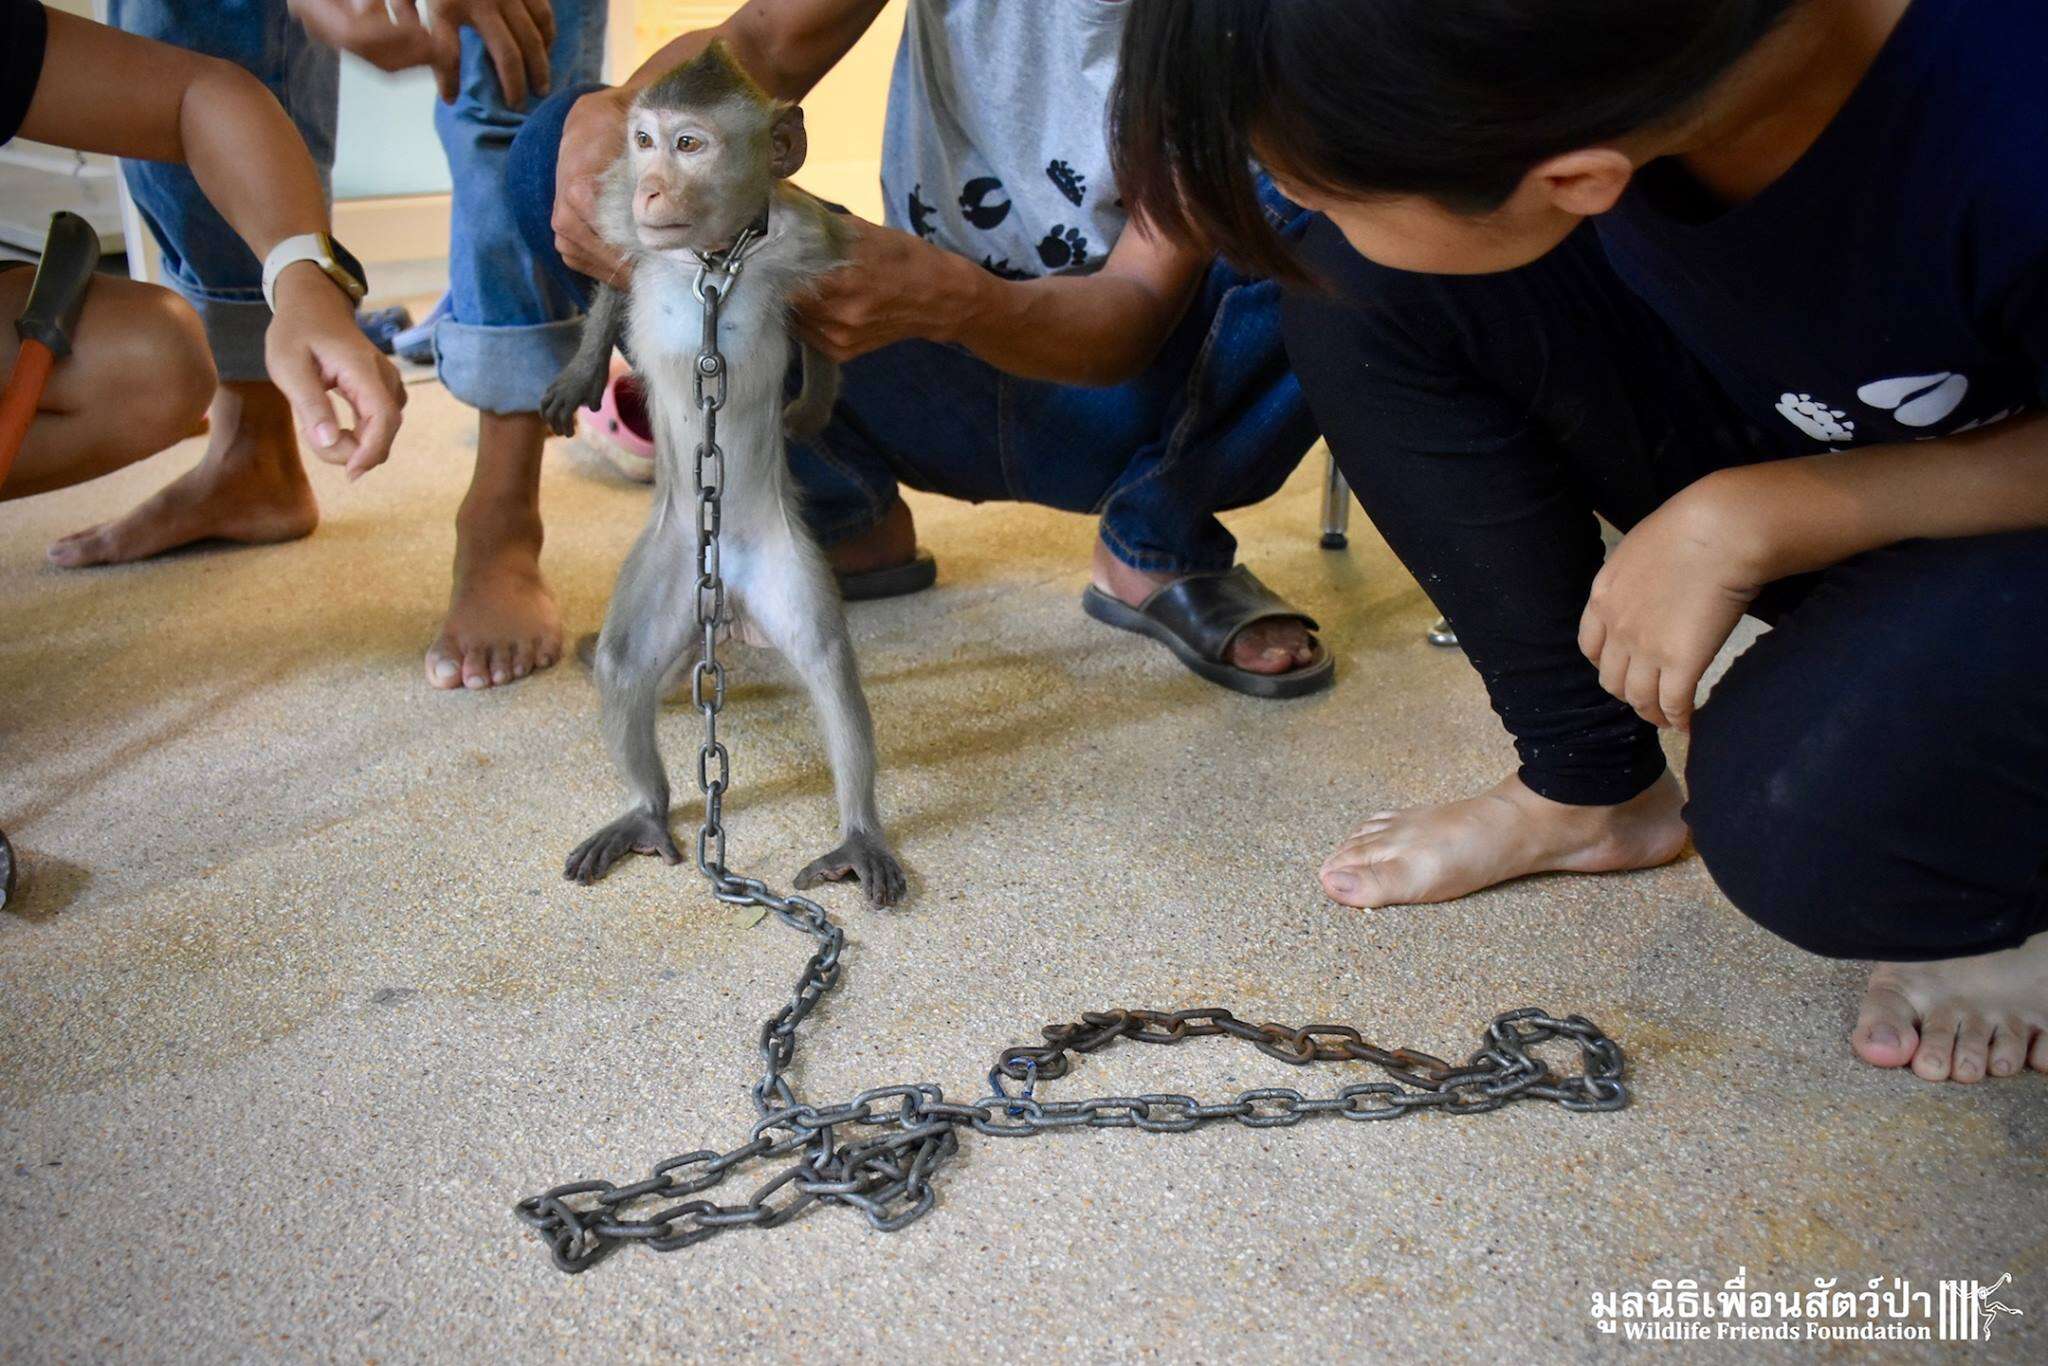 Chained macaque